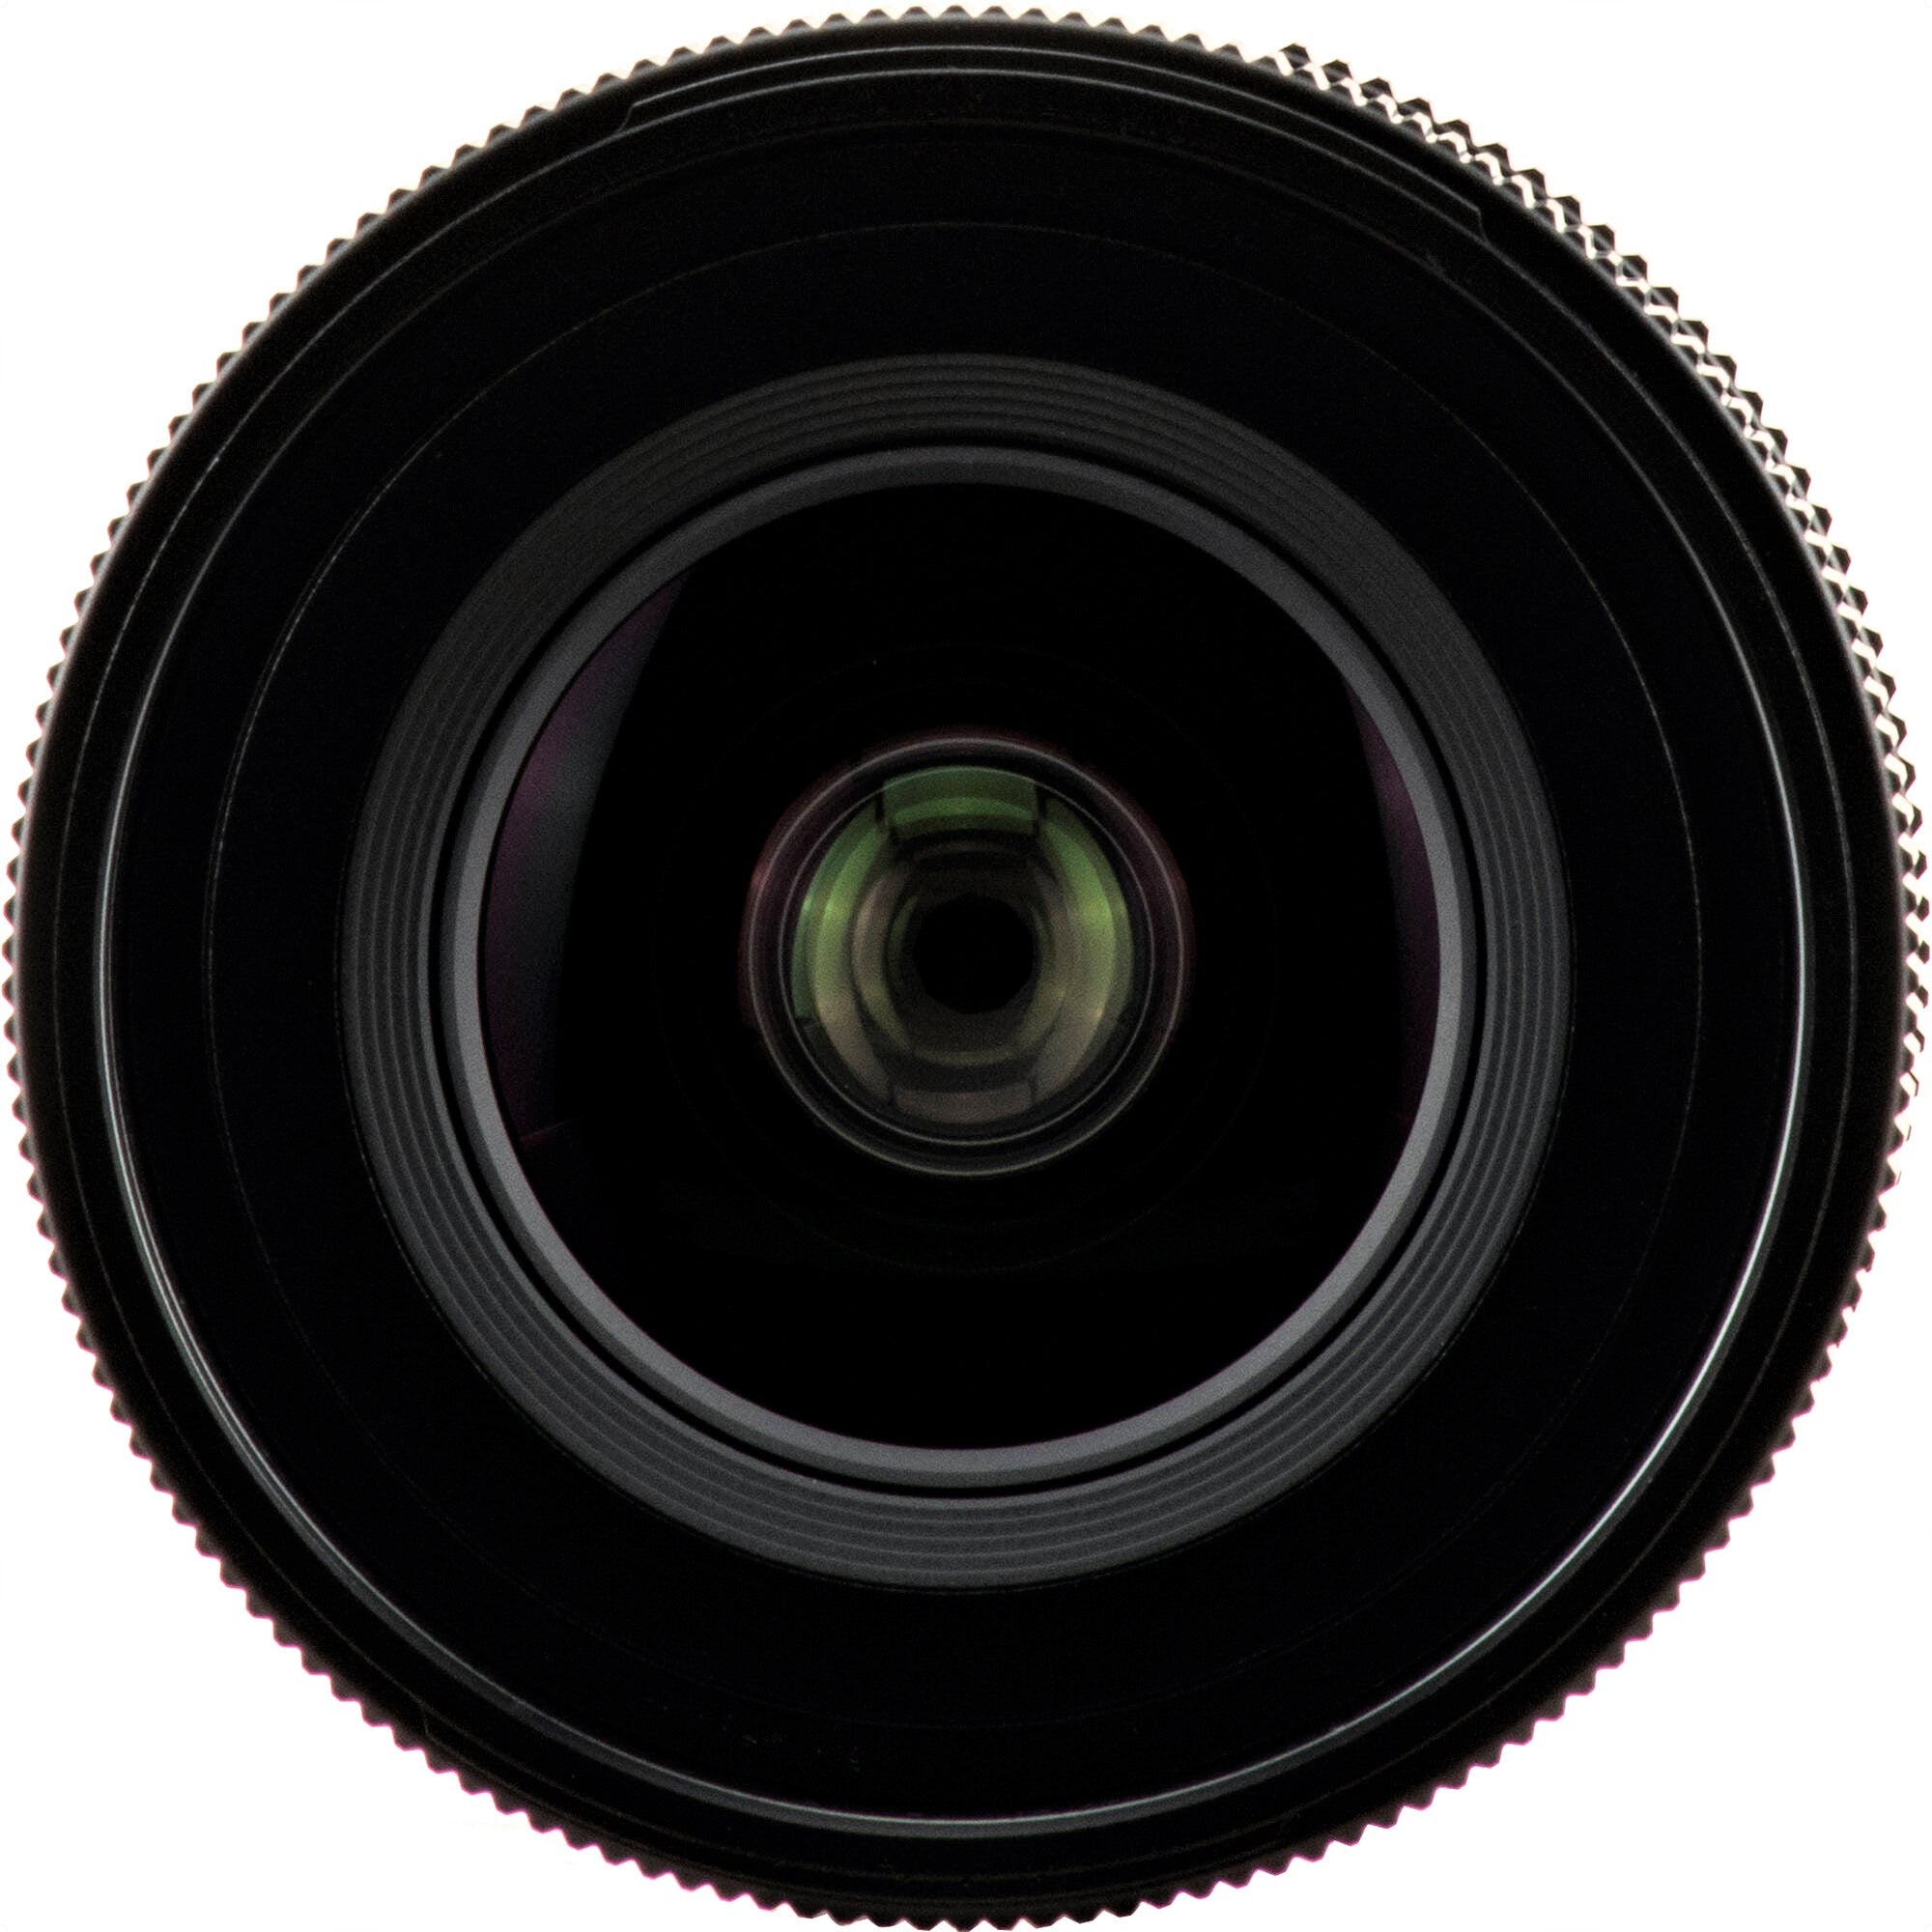 Sigma 24mm F2.0 DG DN Contemporary Lens (Sony E Mount) in a Front Close-Up View